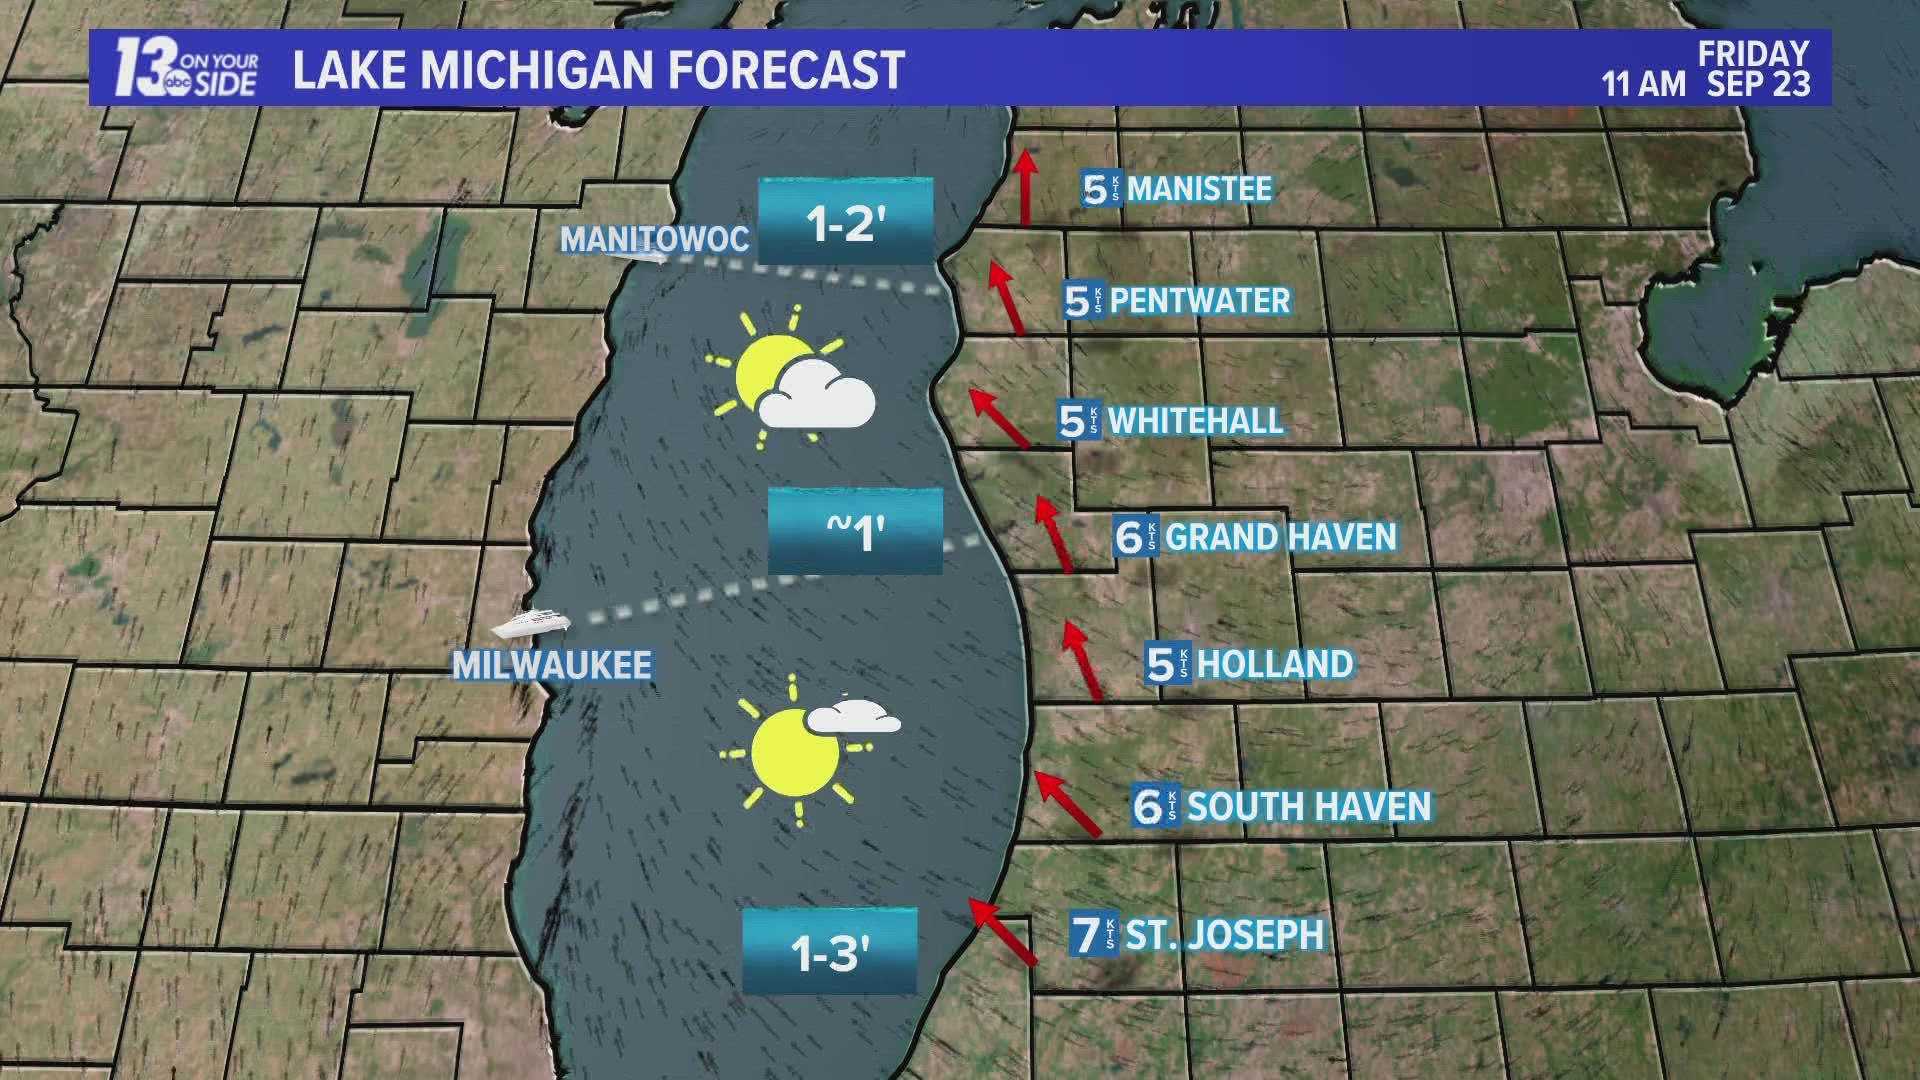 Meteorologist Michael Behrens has your West Michigan Beach & Boating Forecast for 9/23/2022.